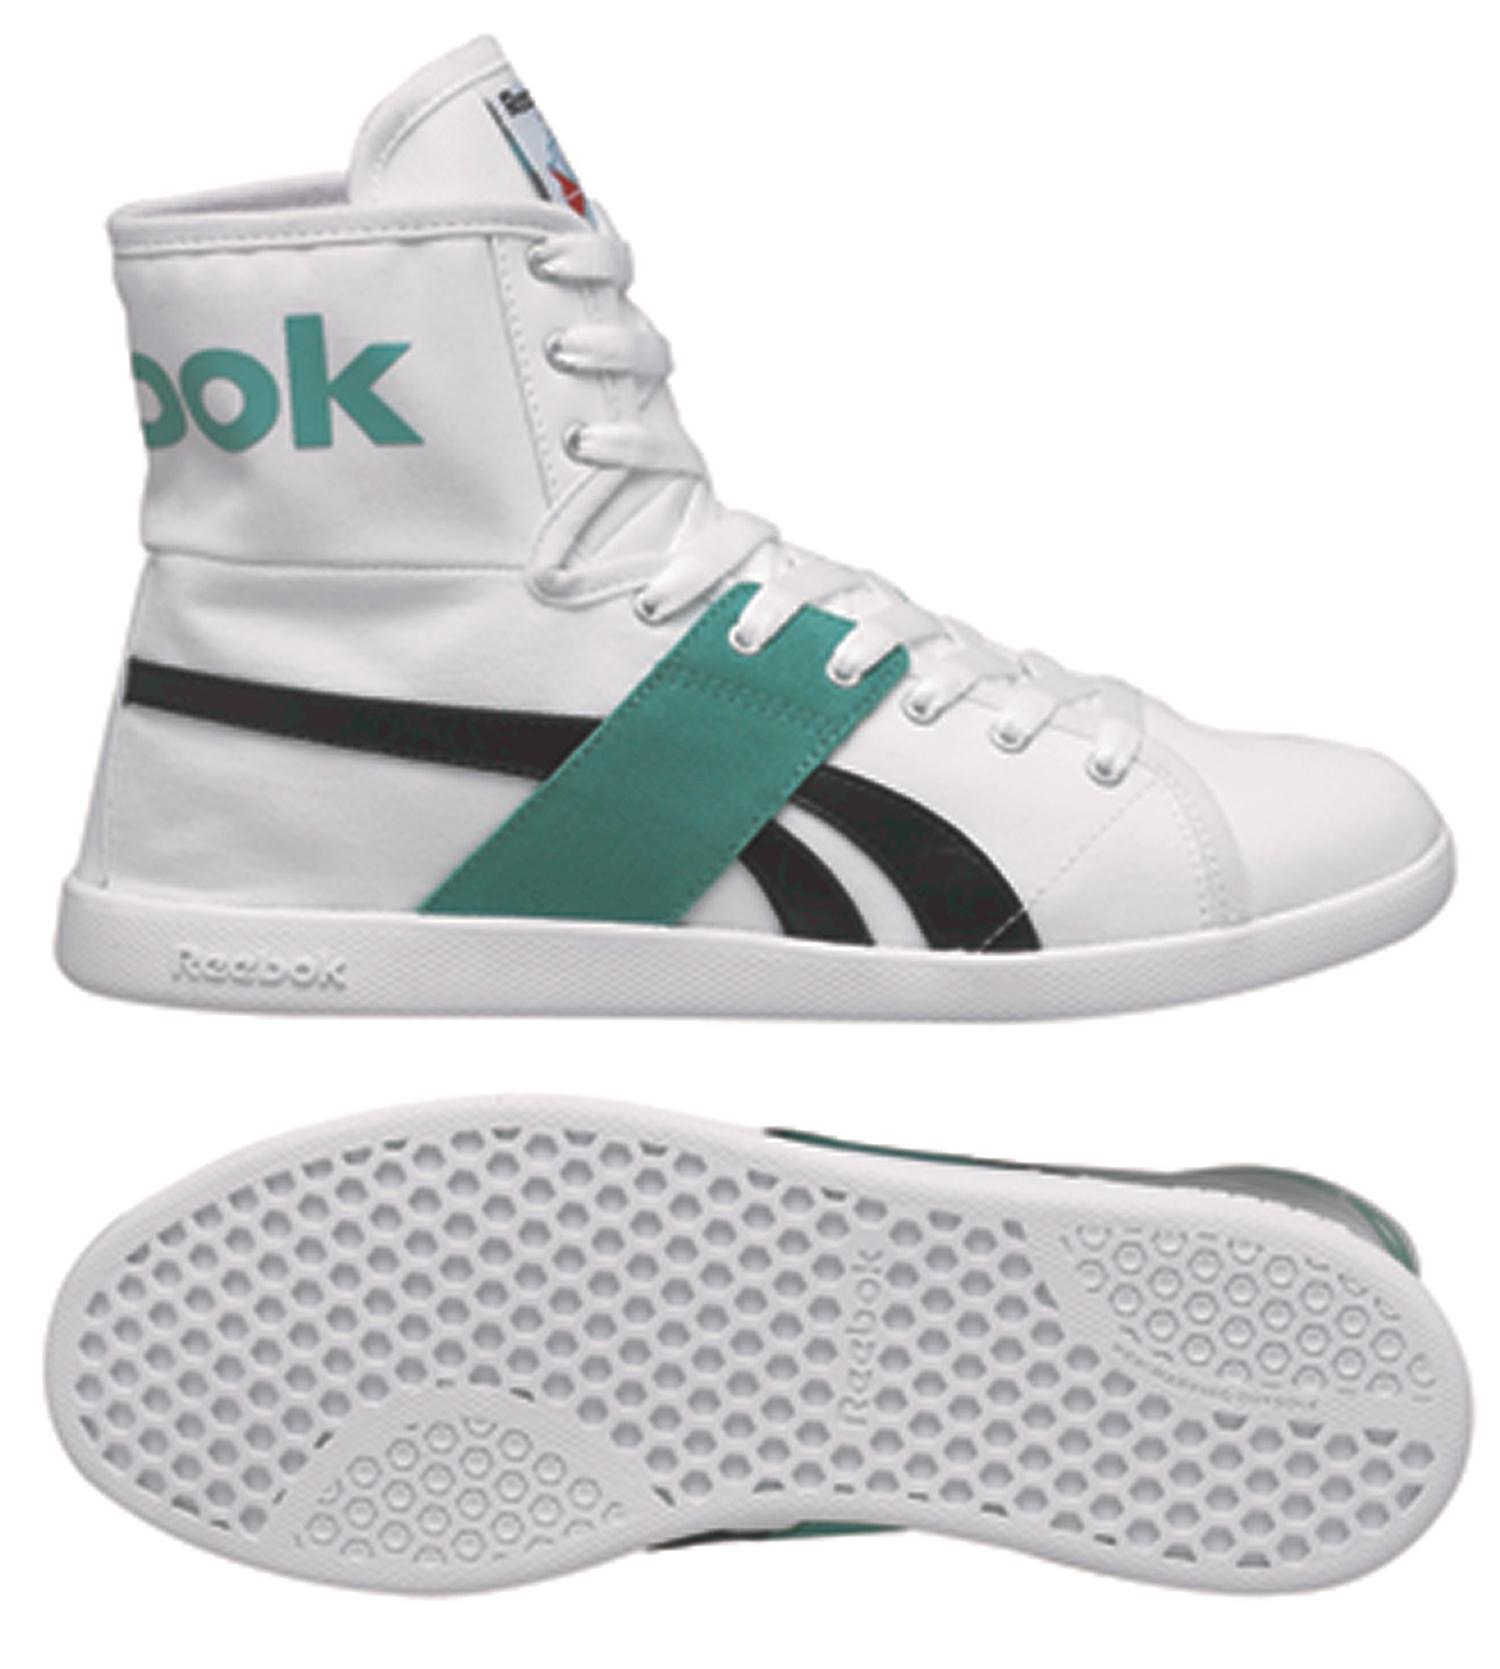 Reebok Fly Generation collection